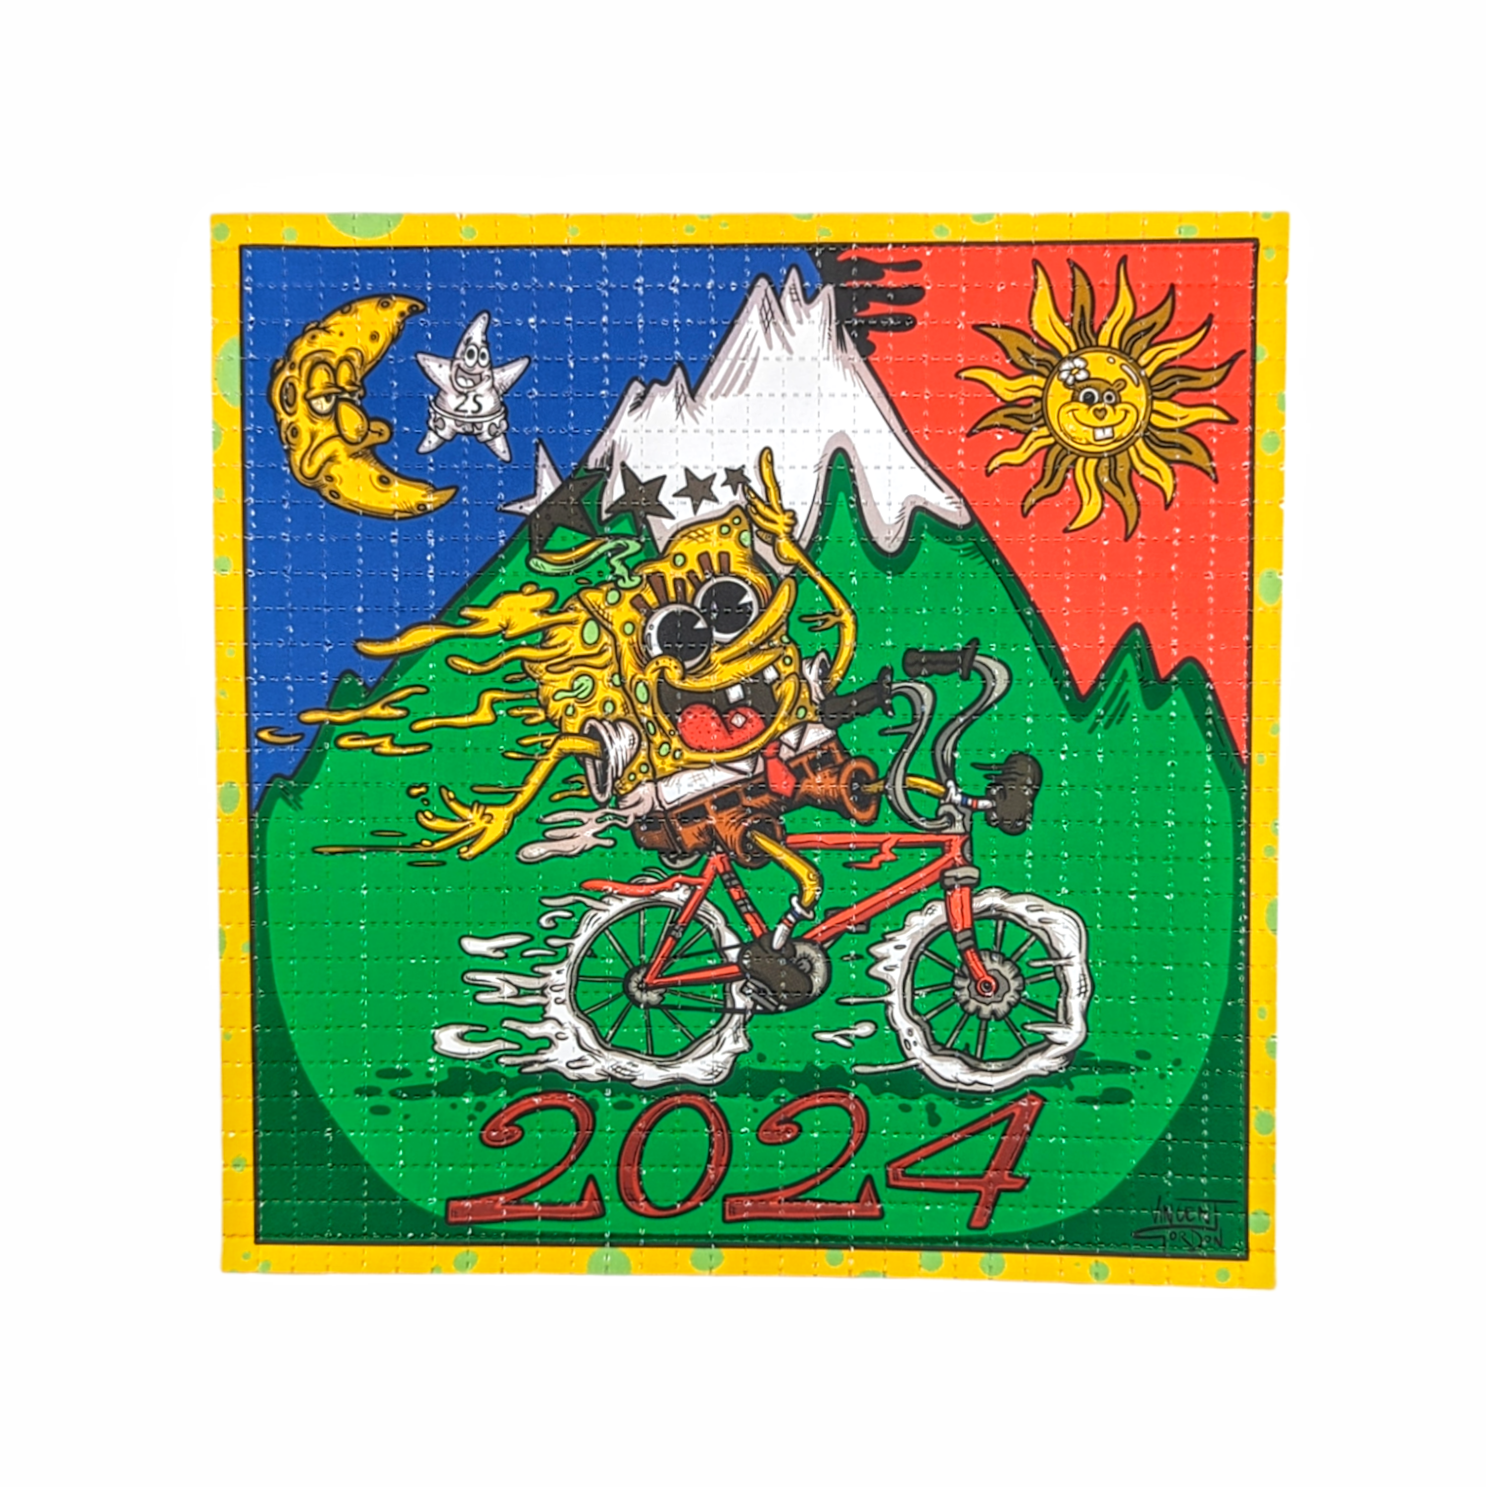 Vincent Gordon Bike Day 2024 (SpongeBob), 2024 Archival Pigment Print on Perforated Blotter Paper 7.75 x 7.75 in Edition of 100  Hand Signed + Numbered by the artist. Perforated and published by Zane Kesey in Pleasant Hill, OR.